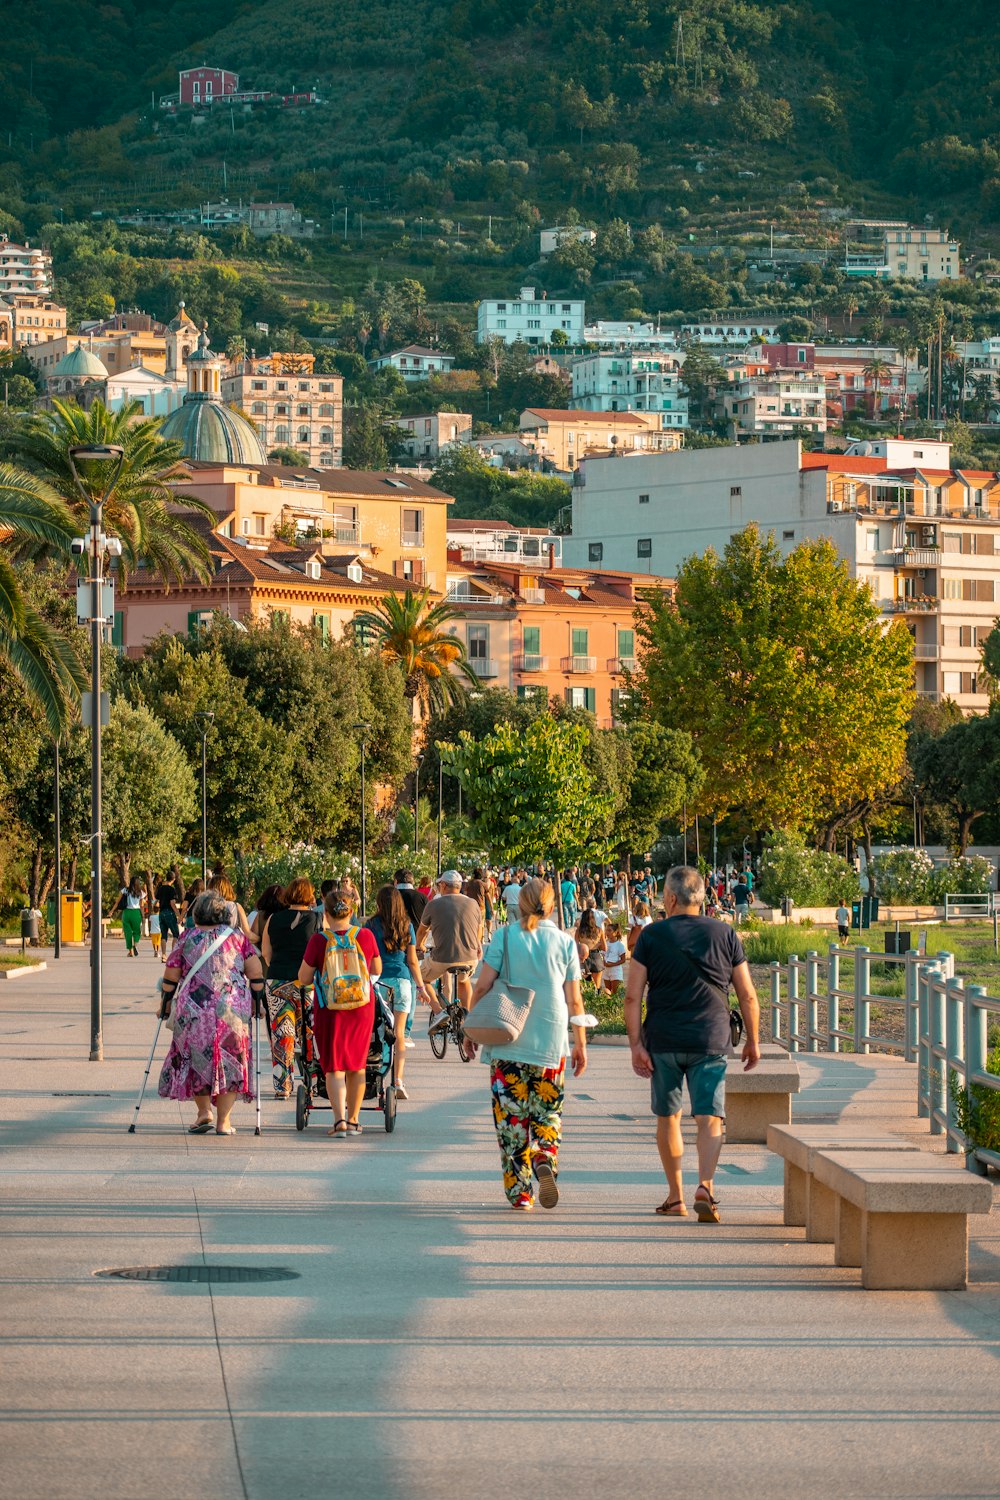 a group of people walking on a path with trees and buildings in the background